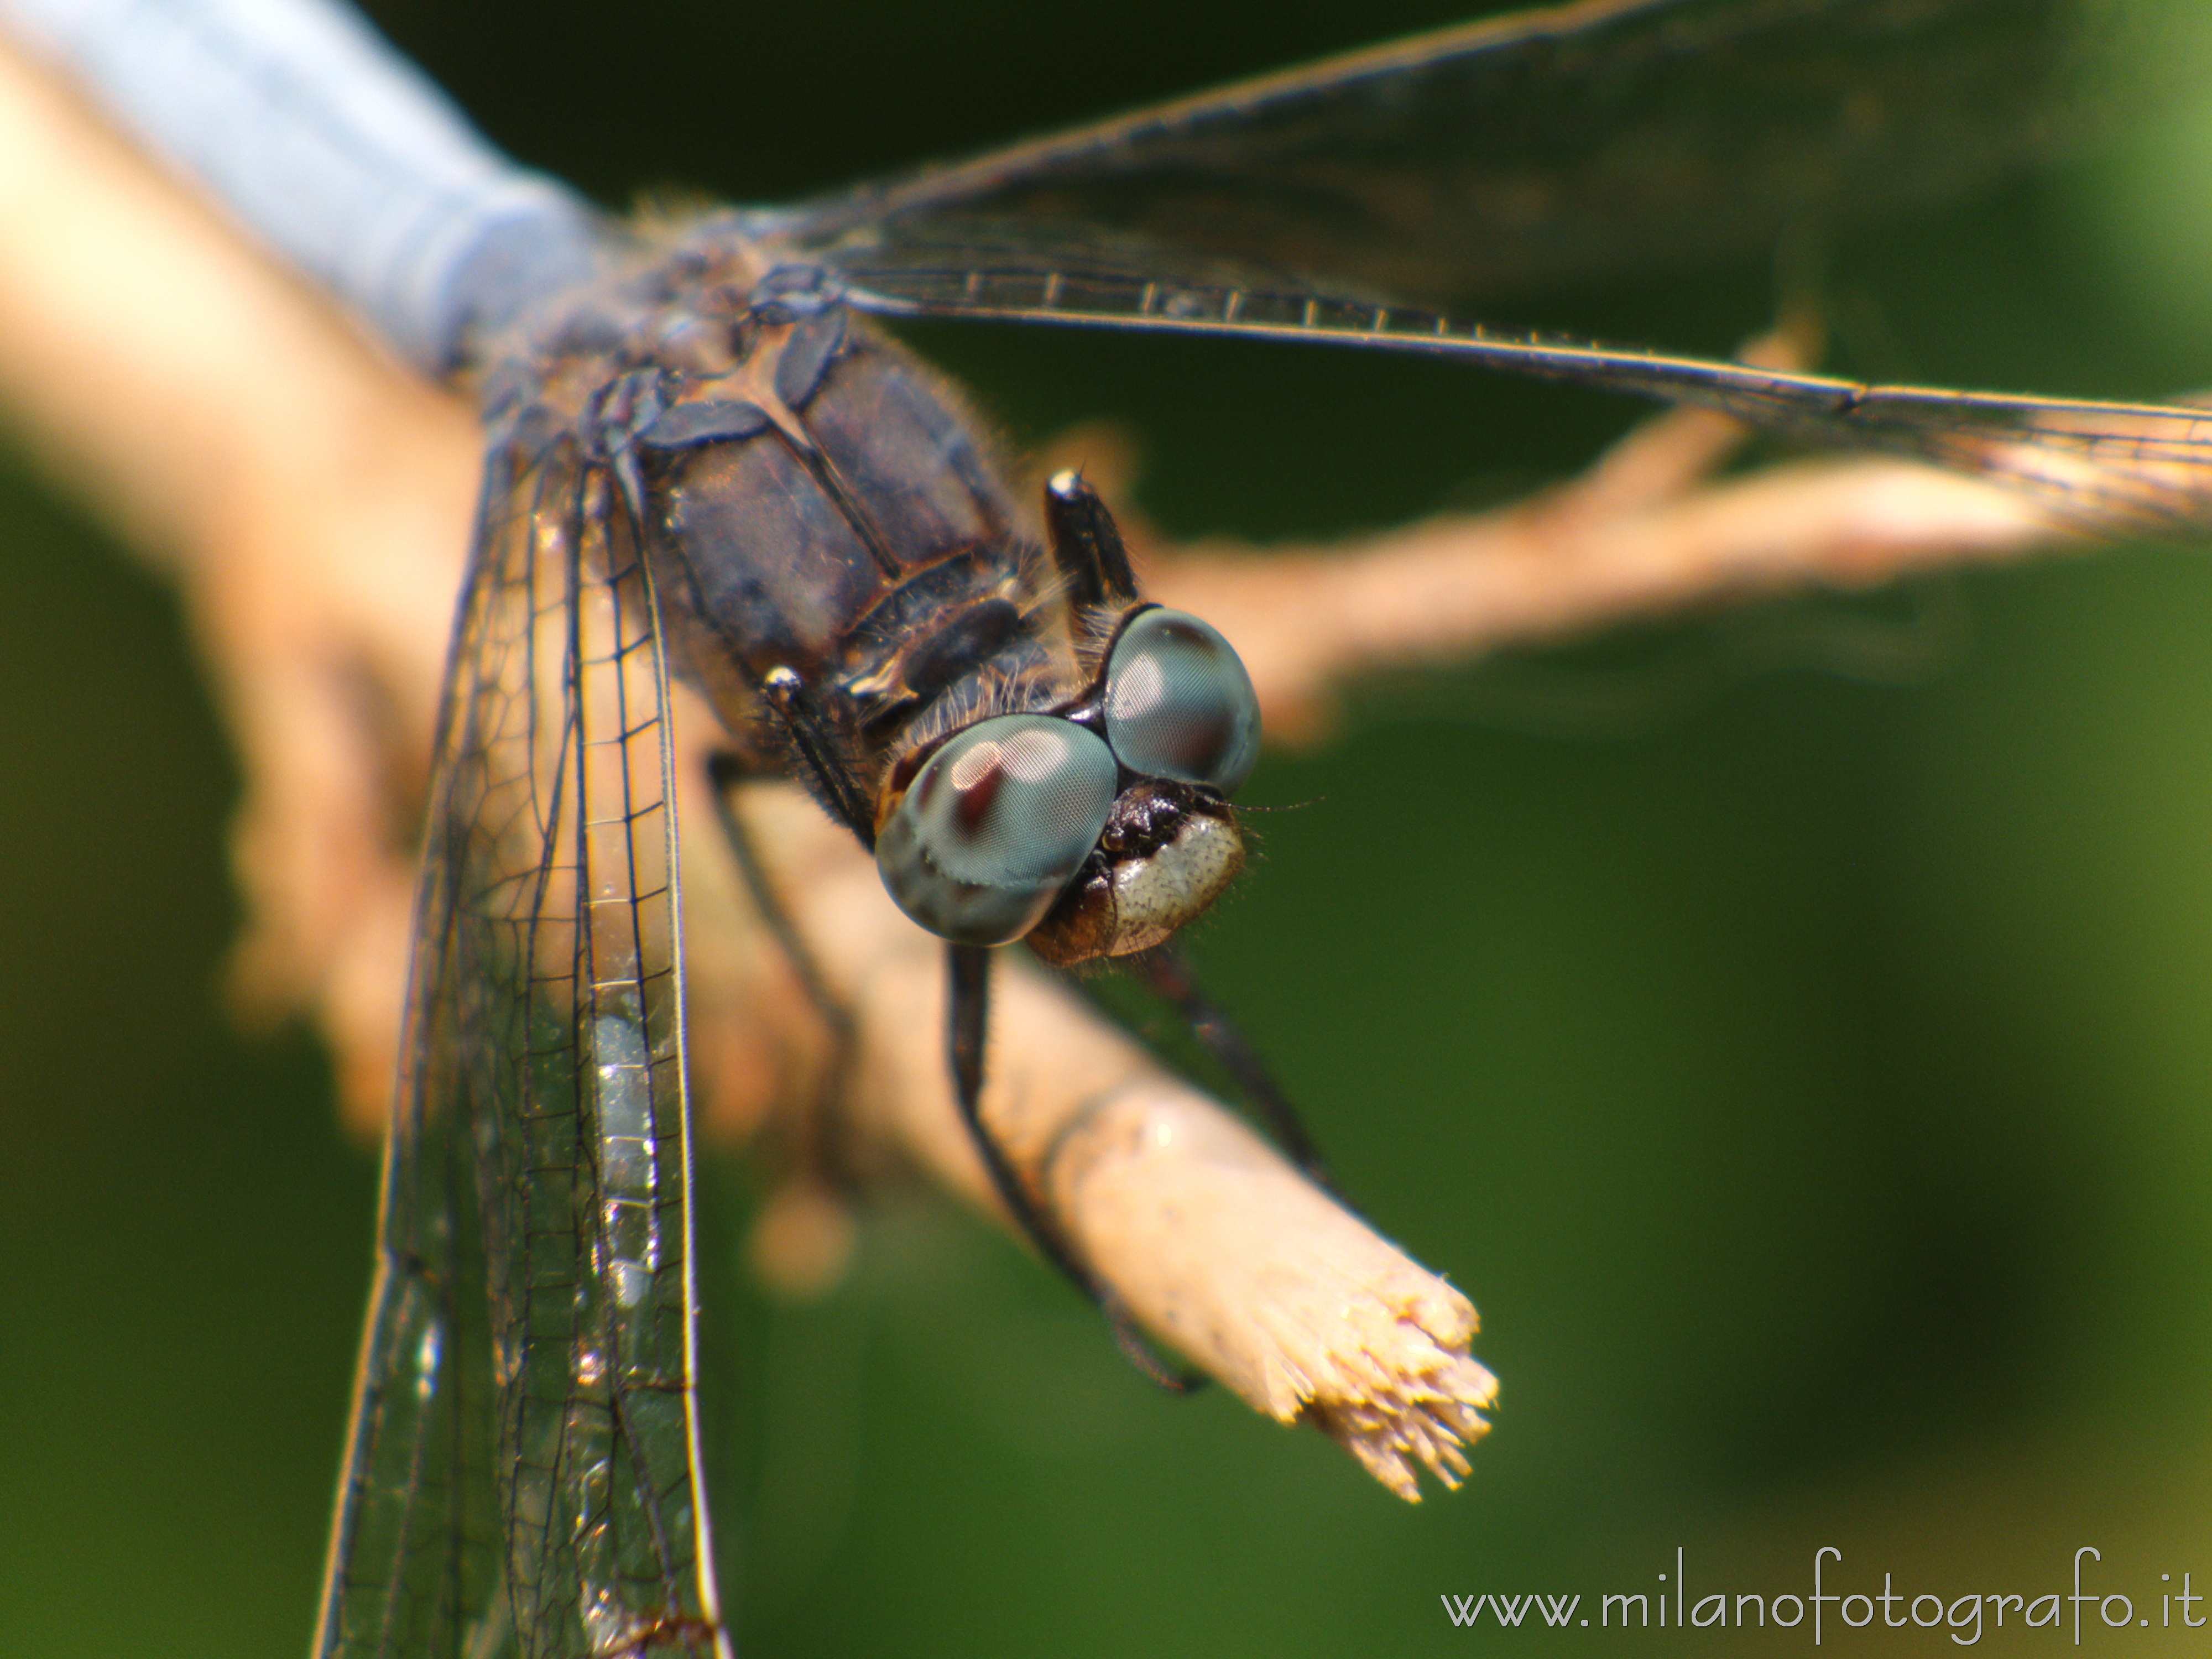 Cadrezzate (Varese, Italy): Probably male Orthetrum coerulescens - Cadrezzate (Varese, Italy)